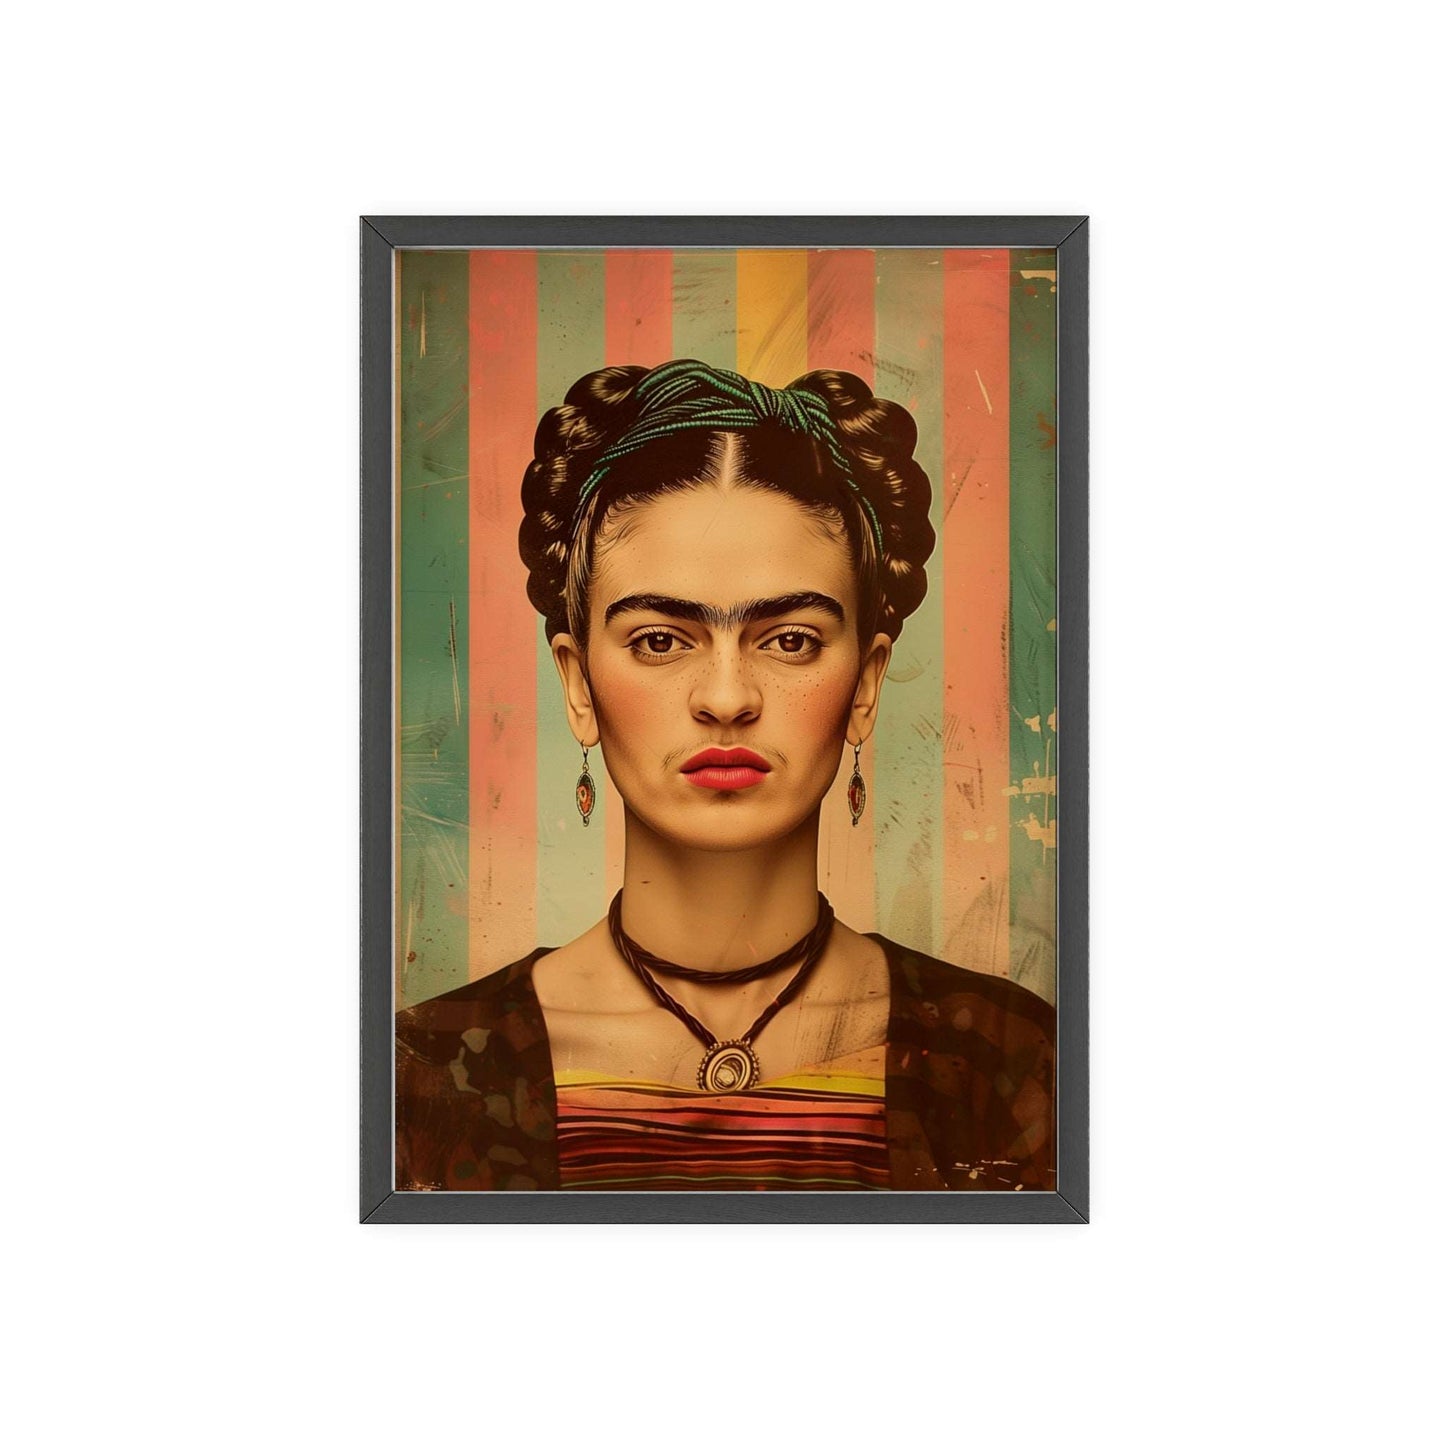 Vintage pop art style poster featuring Frida Kahlo in a vibrant color scheme. Frida has her signature unibrow, set against a background of bold, contrasting colors. The poster is framed.